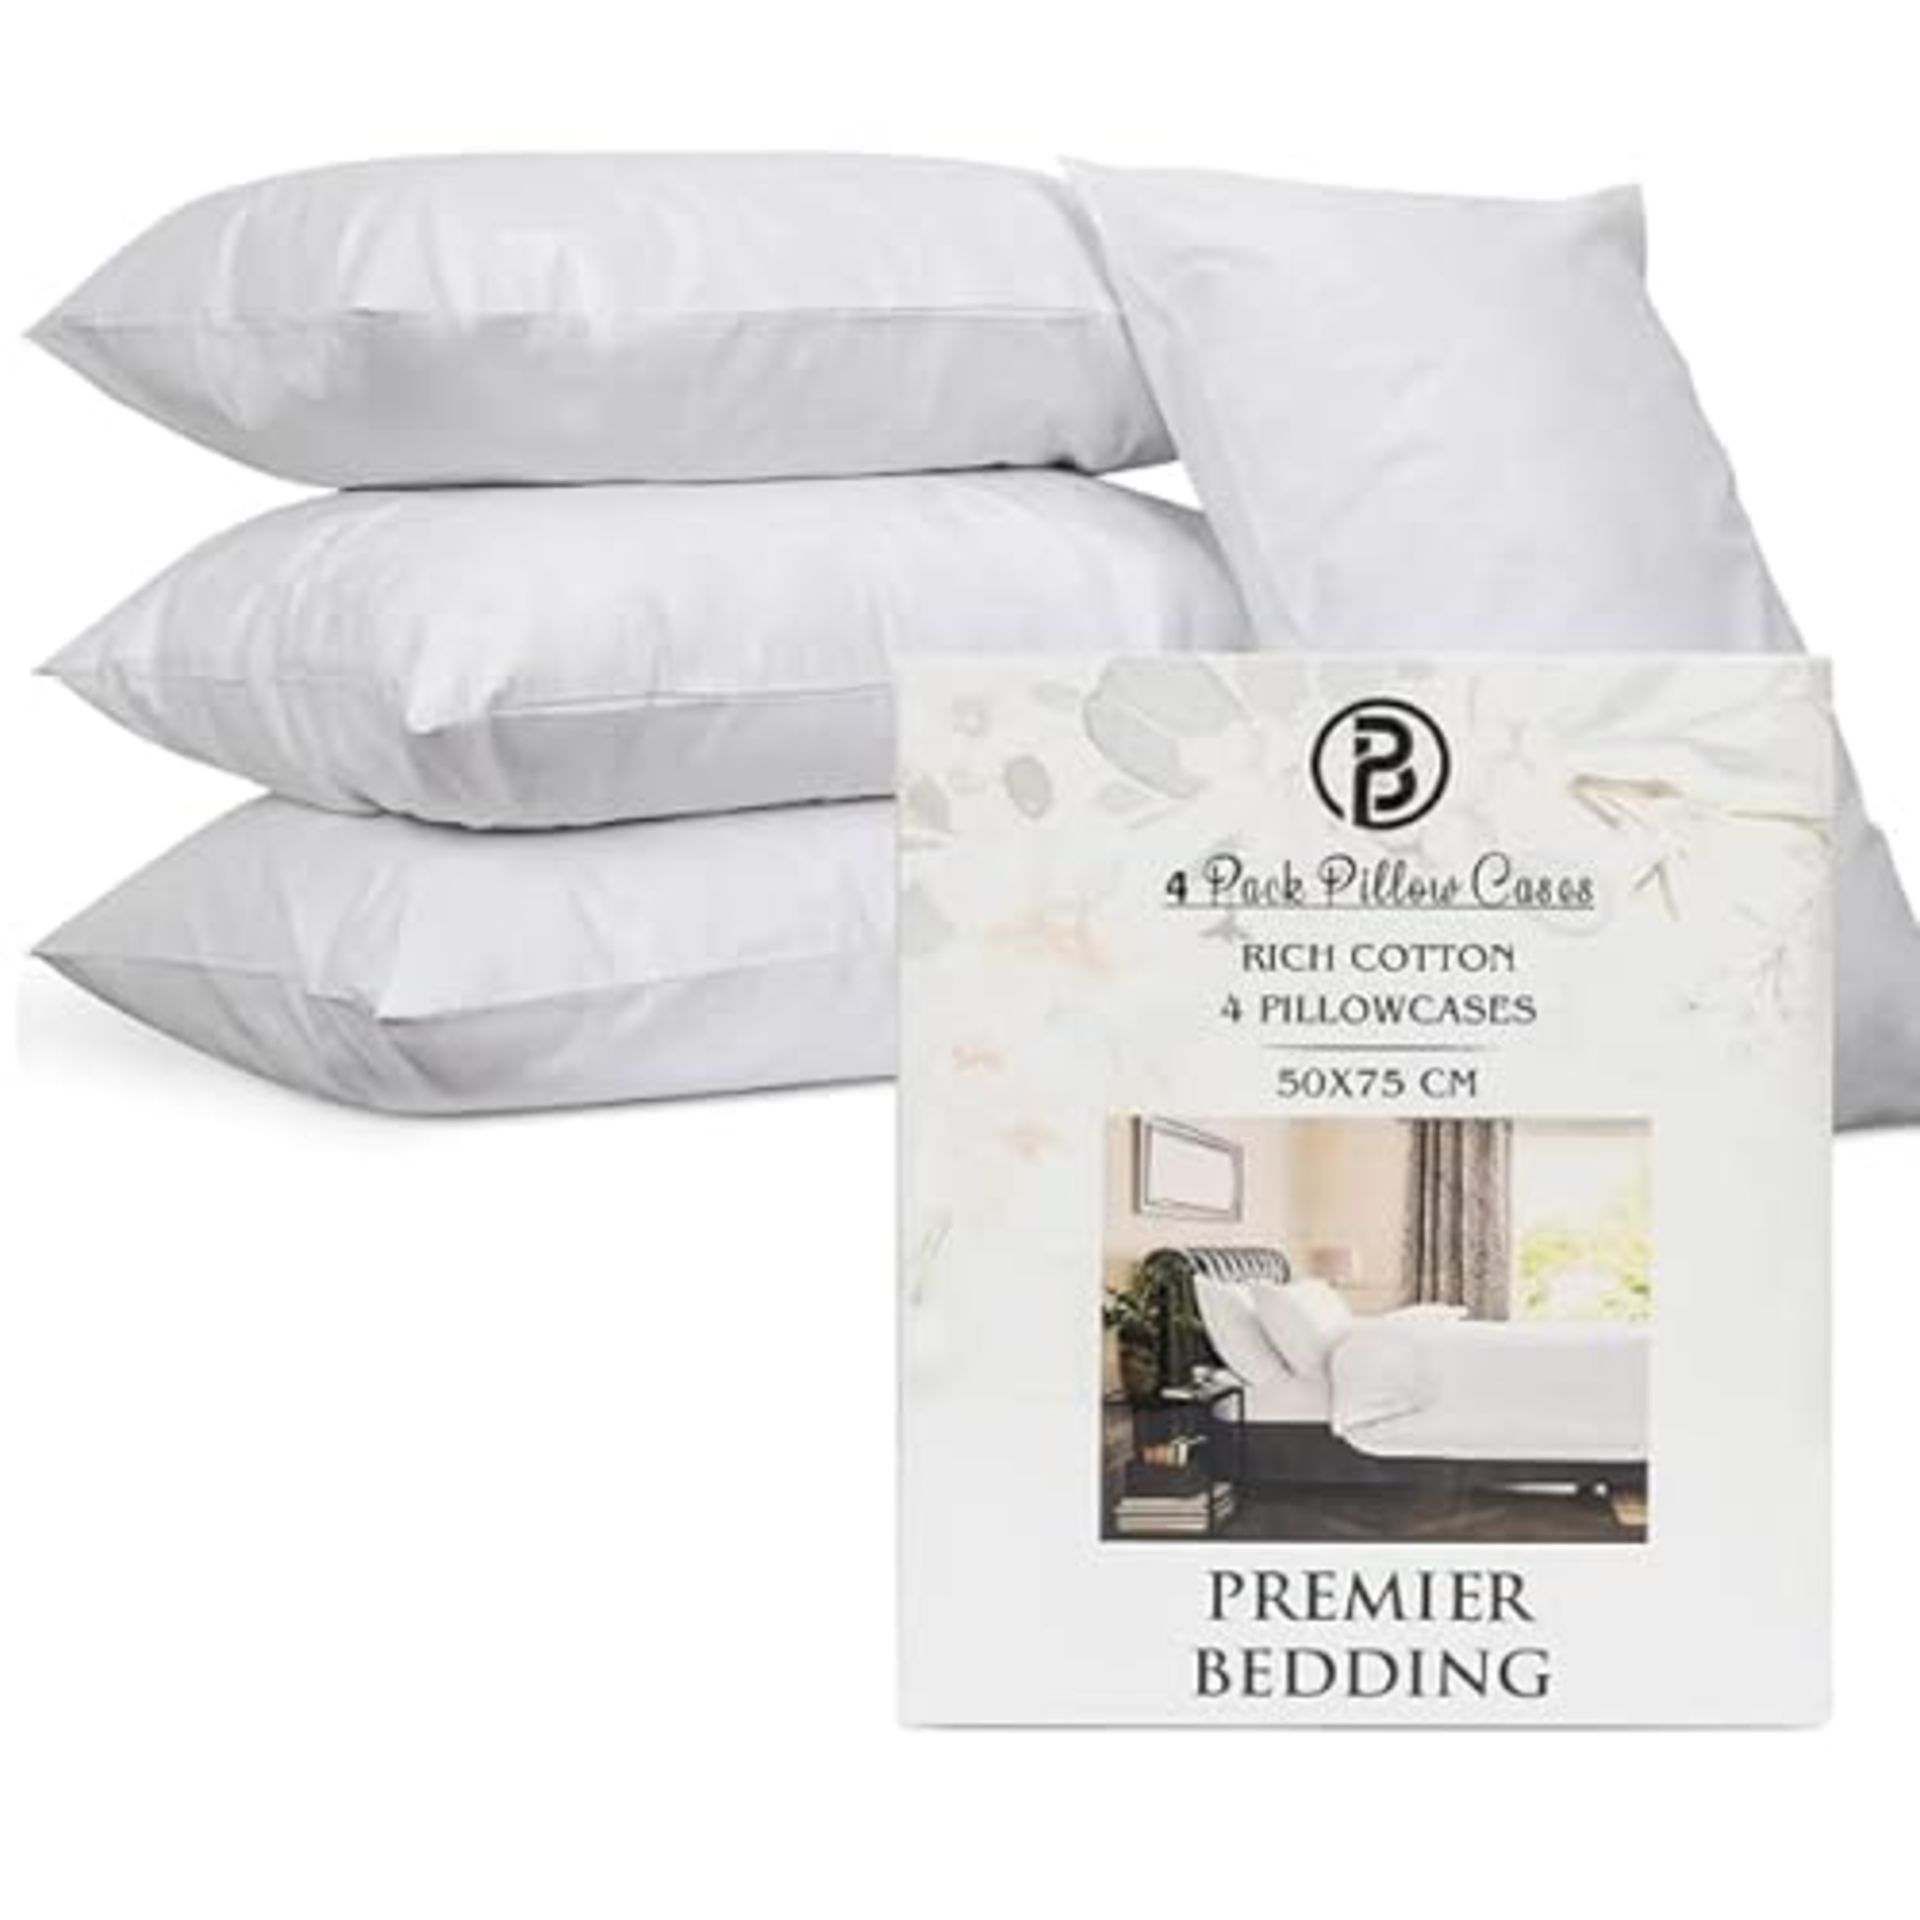 Premier Bedding Pillow Cases 4 pack - Egyptian Cotton 200 Thread Count Pillow Cases/Pillow Protecto